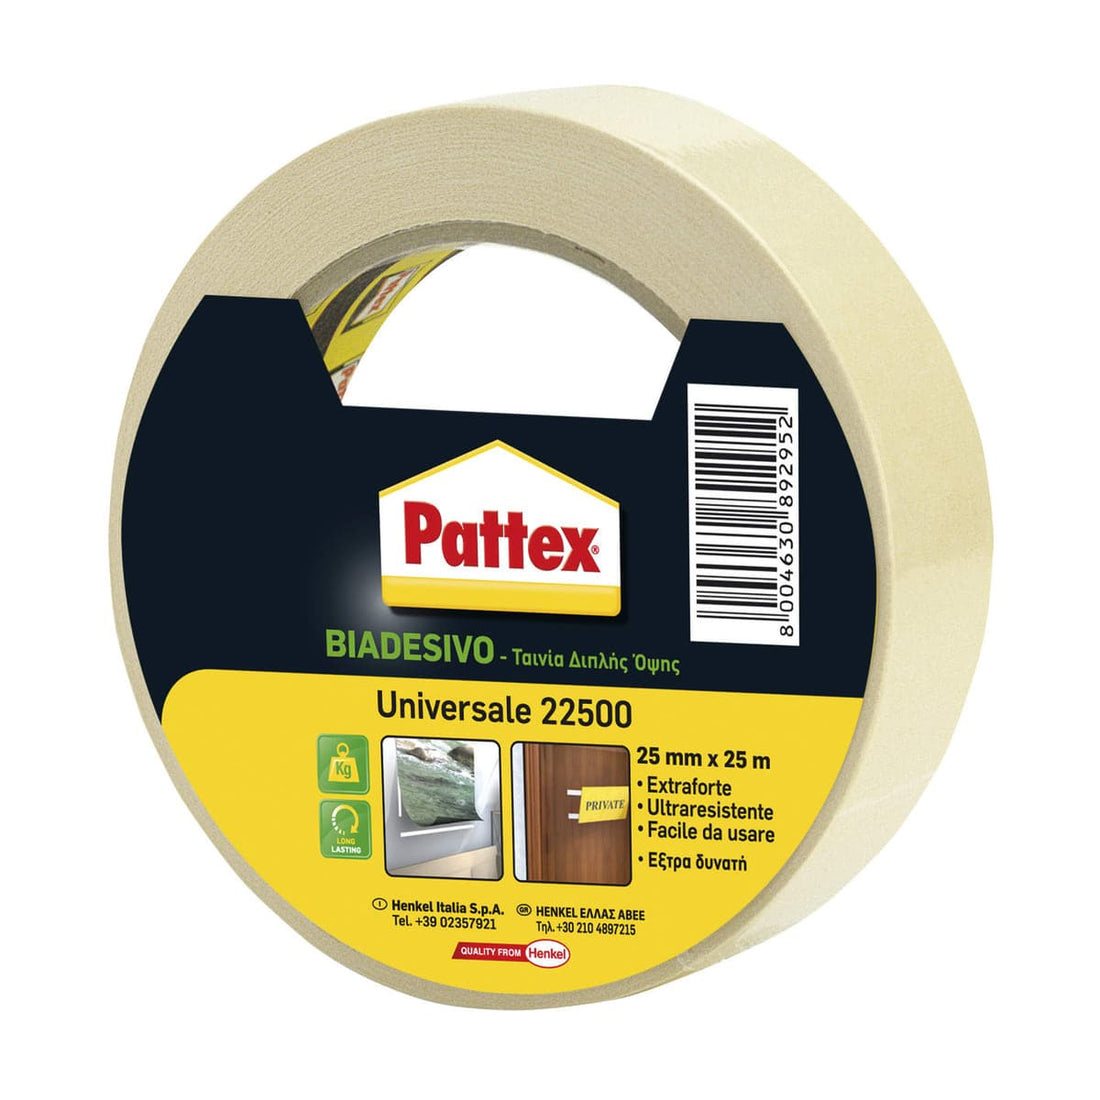 PATTEX UNIVERSAL DOUBLE-SIDED TAPE 25MMX25MT - best price from Maltashopper.com BR470005439